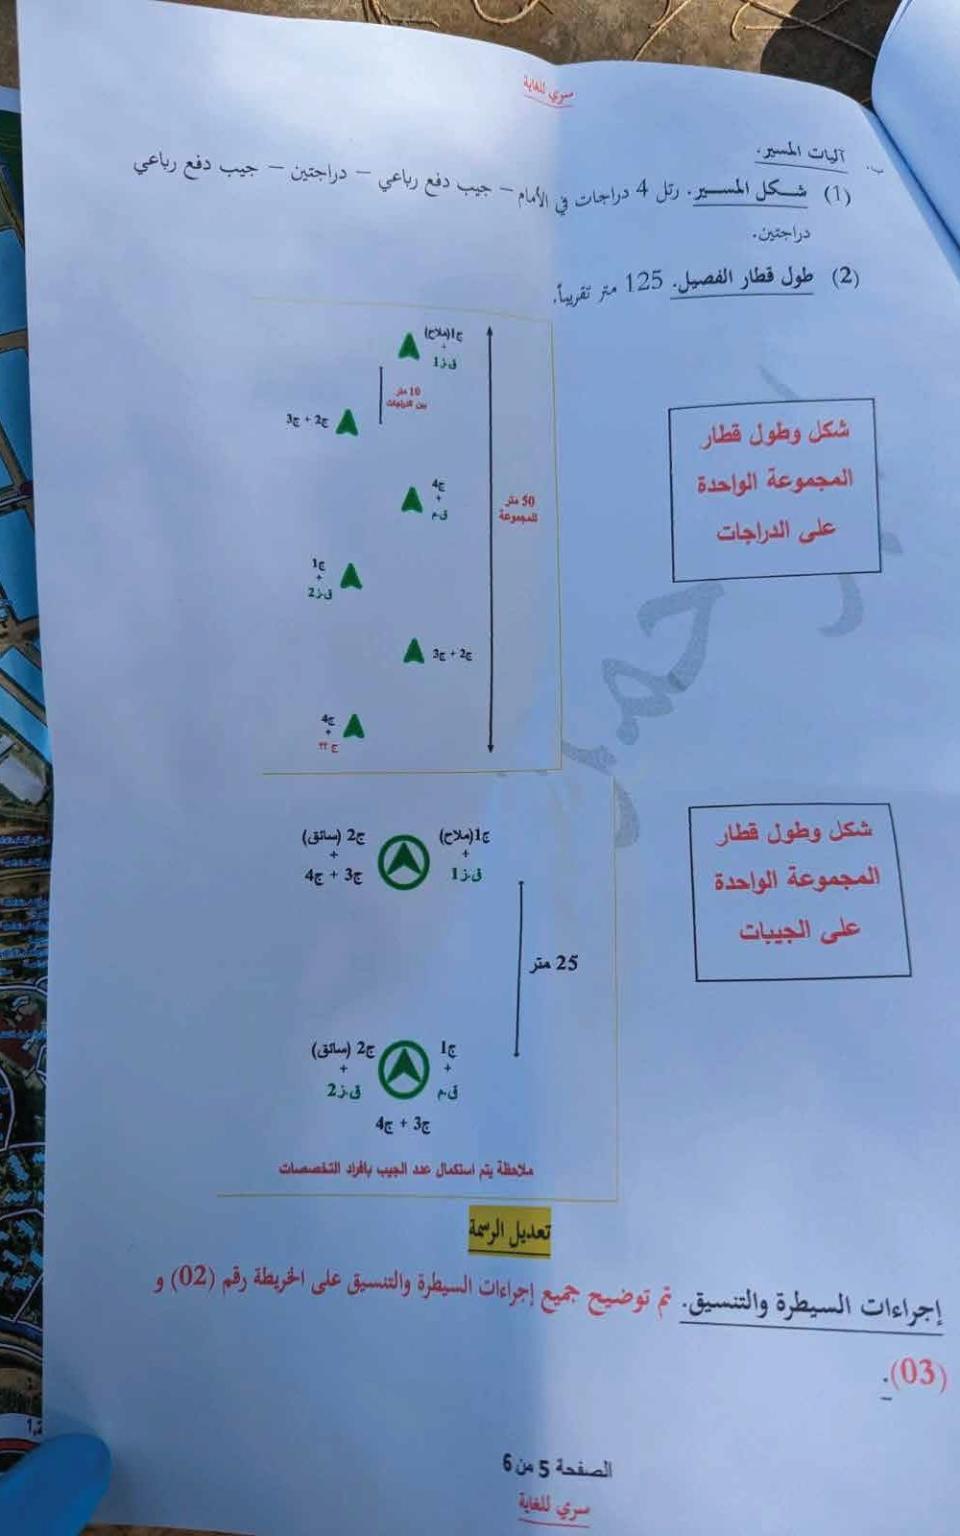 Instruction found on bodies of Hamas operatives. This is a diagram of instructions for the setup of a motorcycle unit.